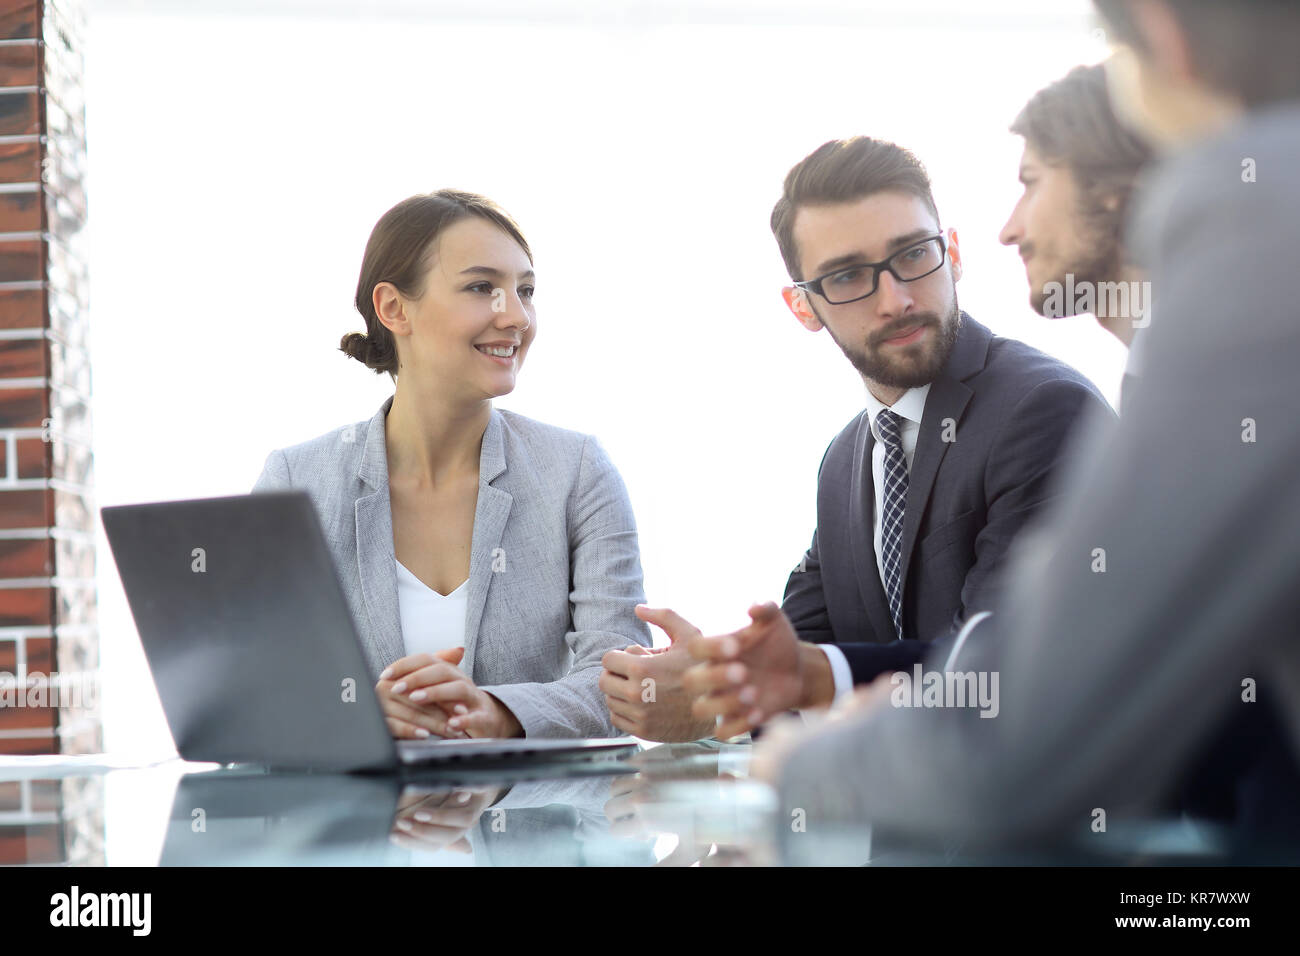 corporate meetings business group Stock Photo